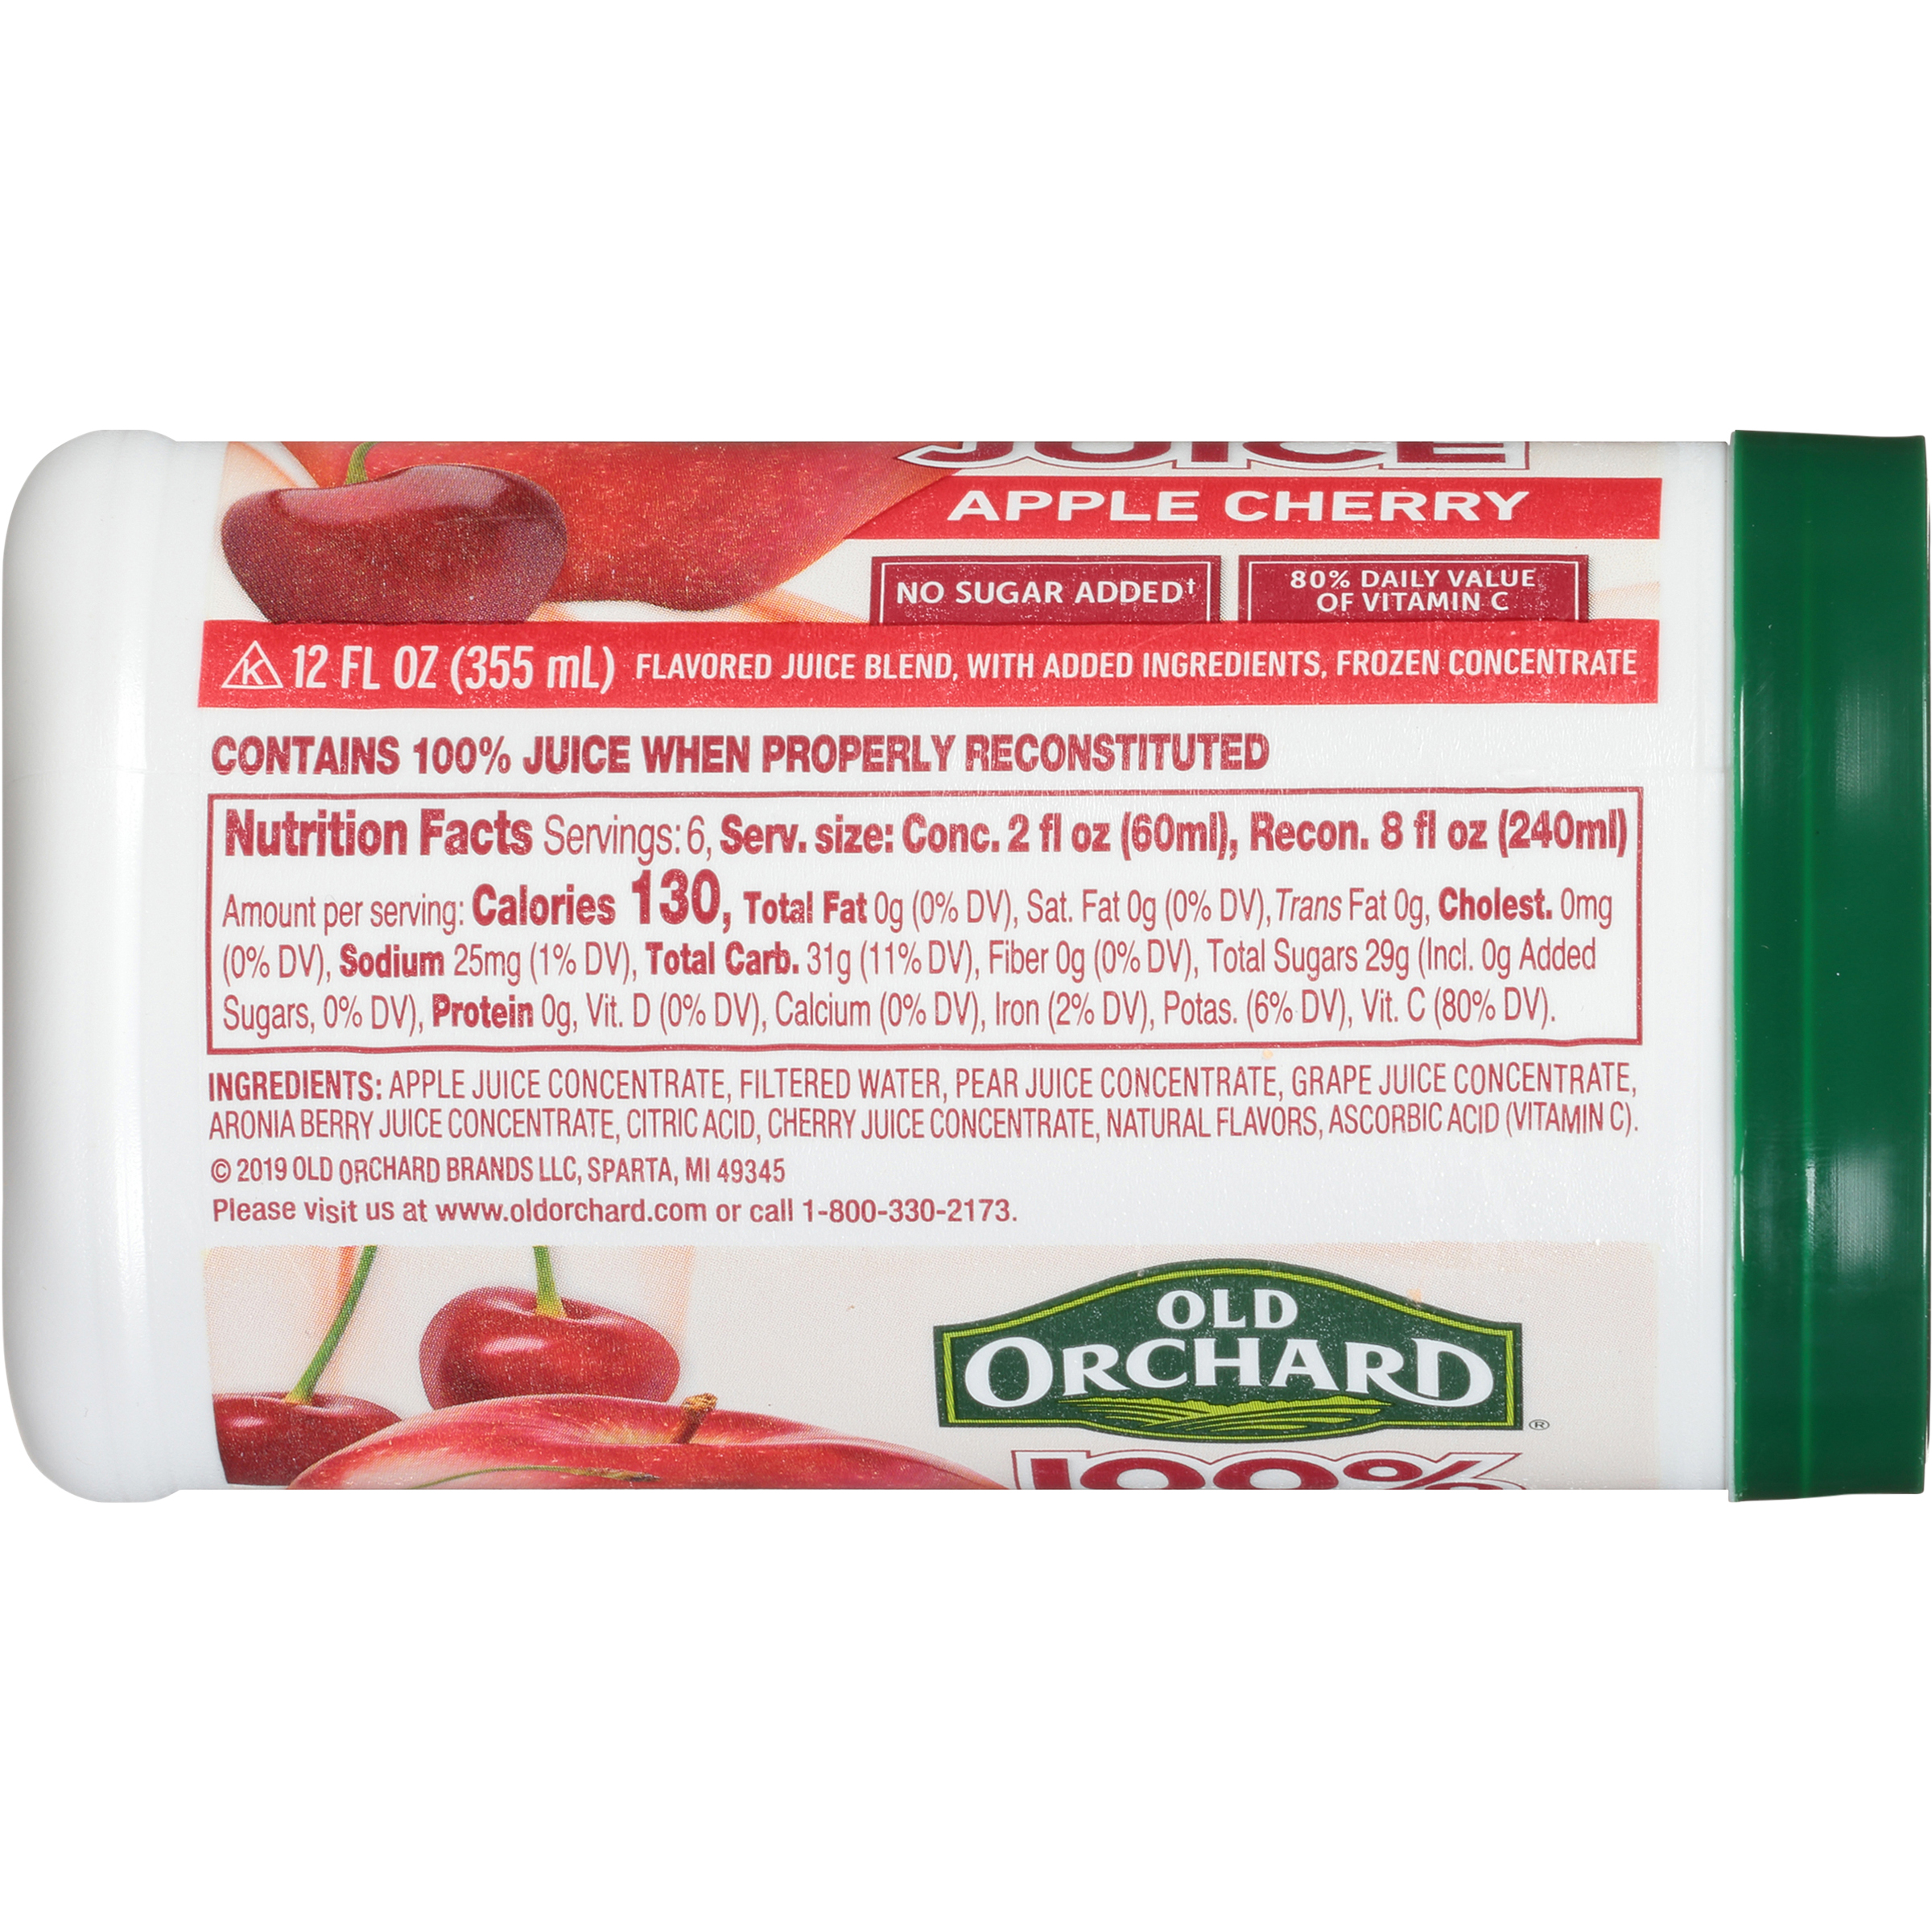 Old Orchard Apple Cherry Flavored 100% Juice Blend, 12 oz Frozen Concentrate - image 4 of 7